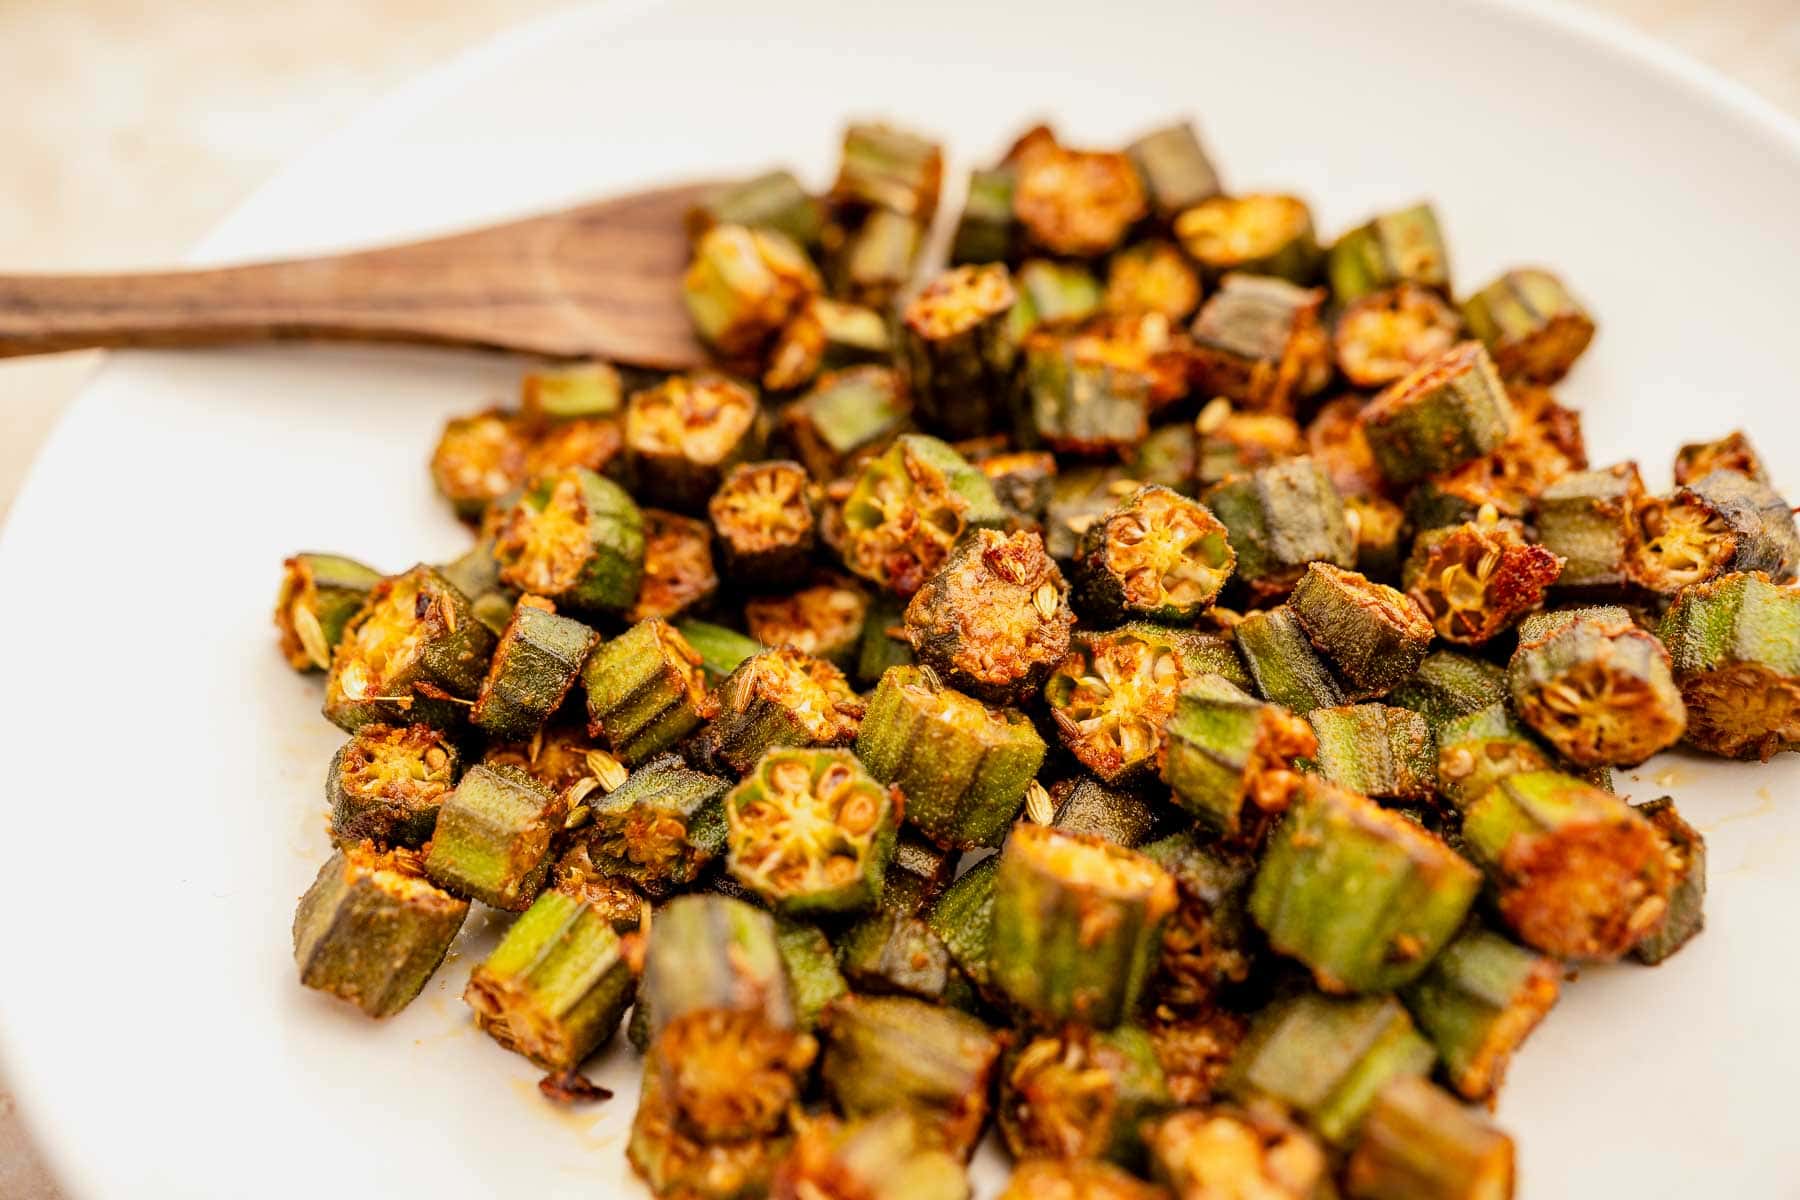 Sautéed okra recipe pieces on a white plate with a wooden fork on the side.